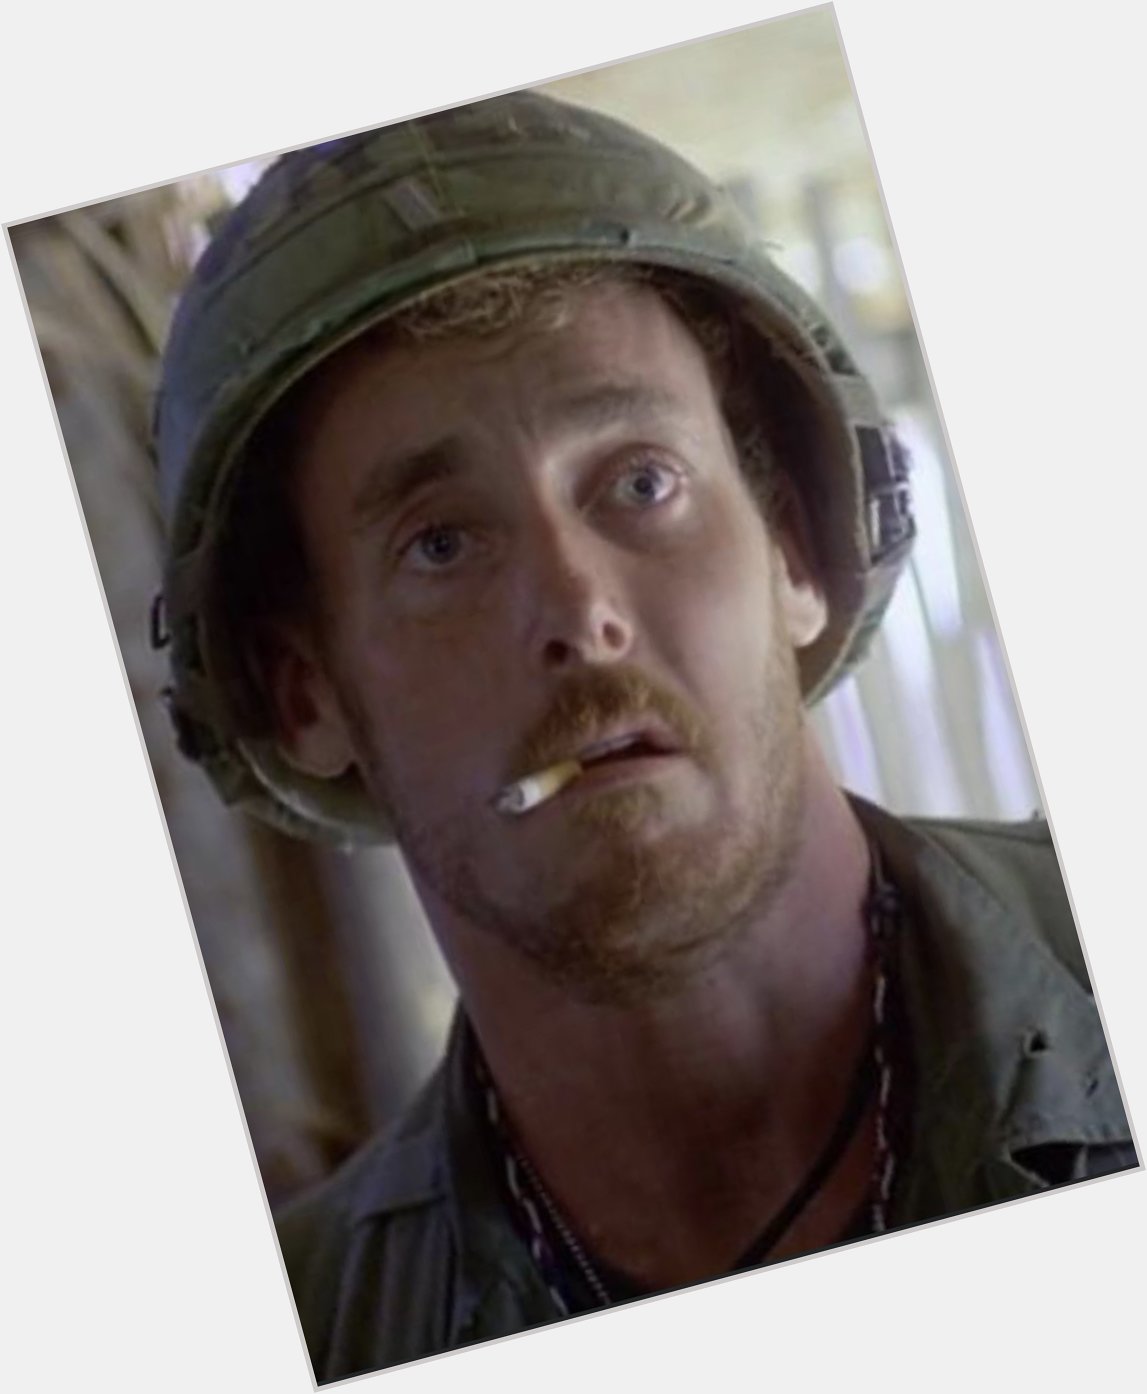 John C. McGinley is 63 today
Platoon (1986) Happy birthday Sir, and thanks for Red O Neill, fantastic character 